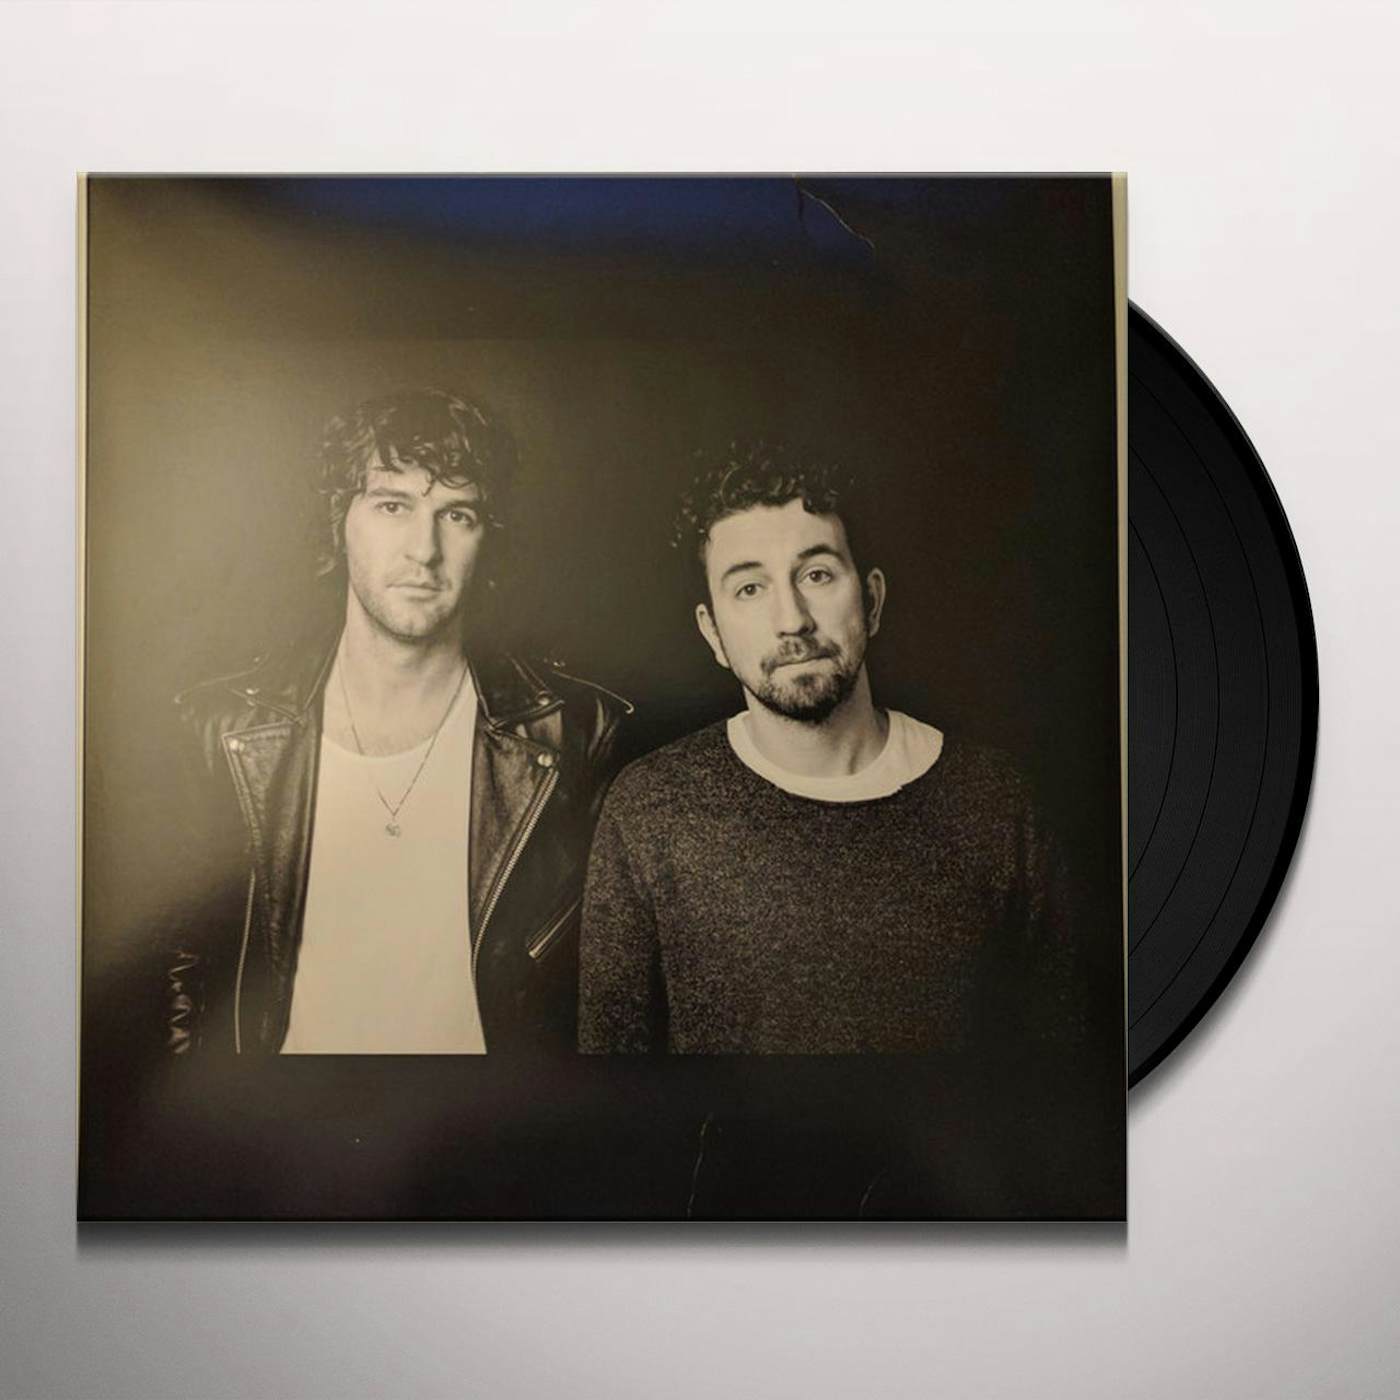 Japandroids NEAR TO THE WILD HEART OF LIFE (COLORED VINYL) Vinyl Record